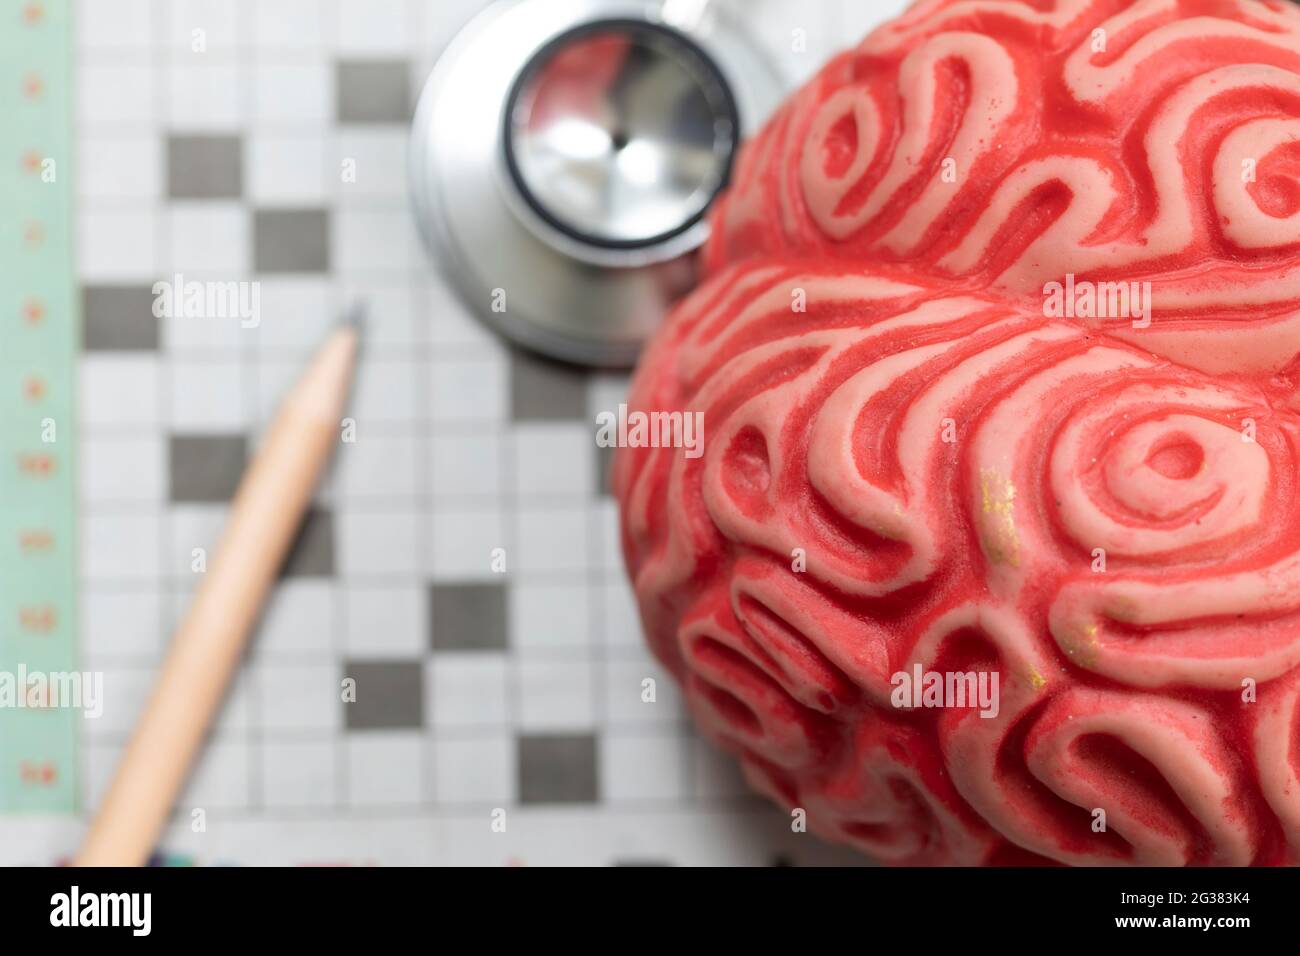 29,850 Brain Test Games Royalty-Free Images, Stock Photos & Pictures